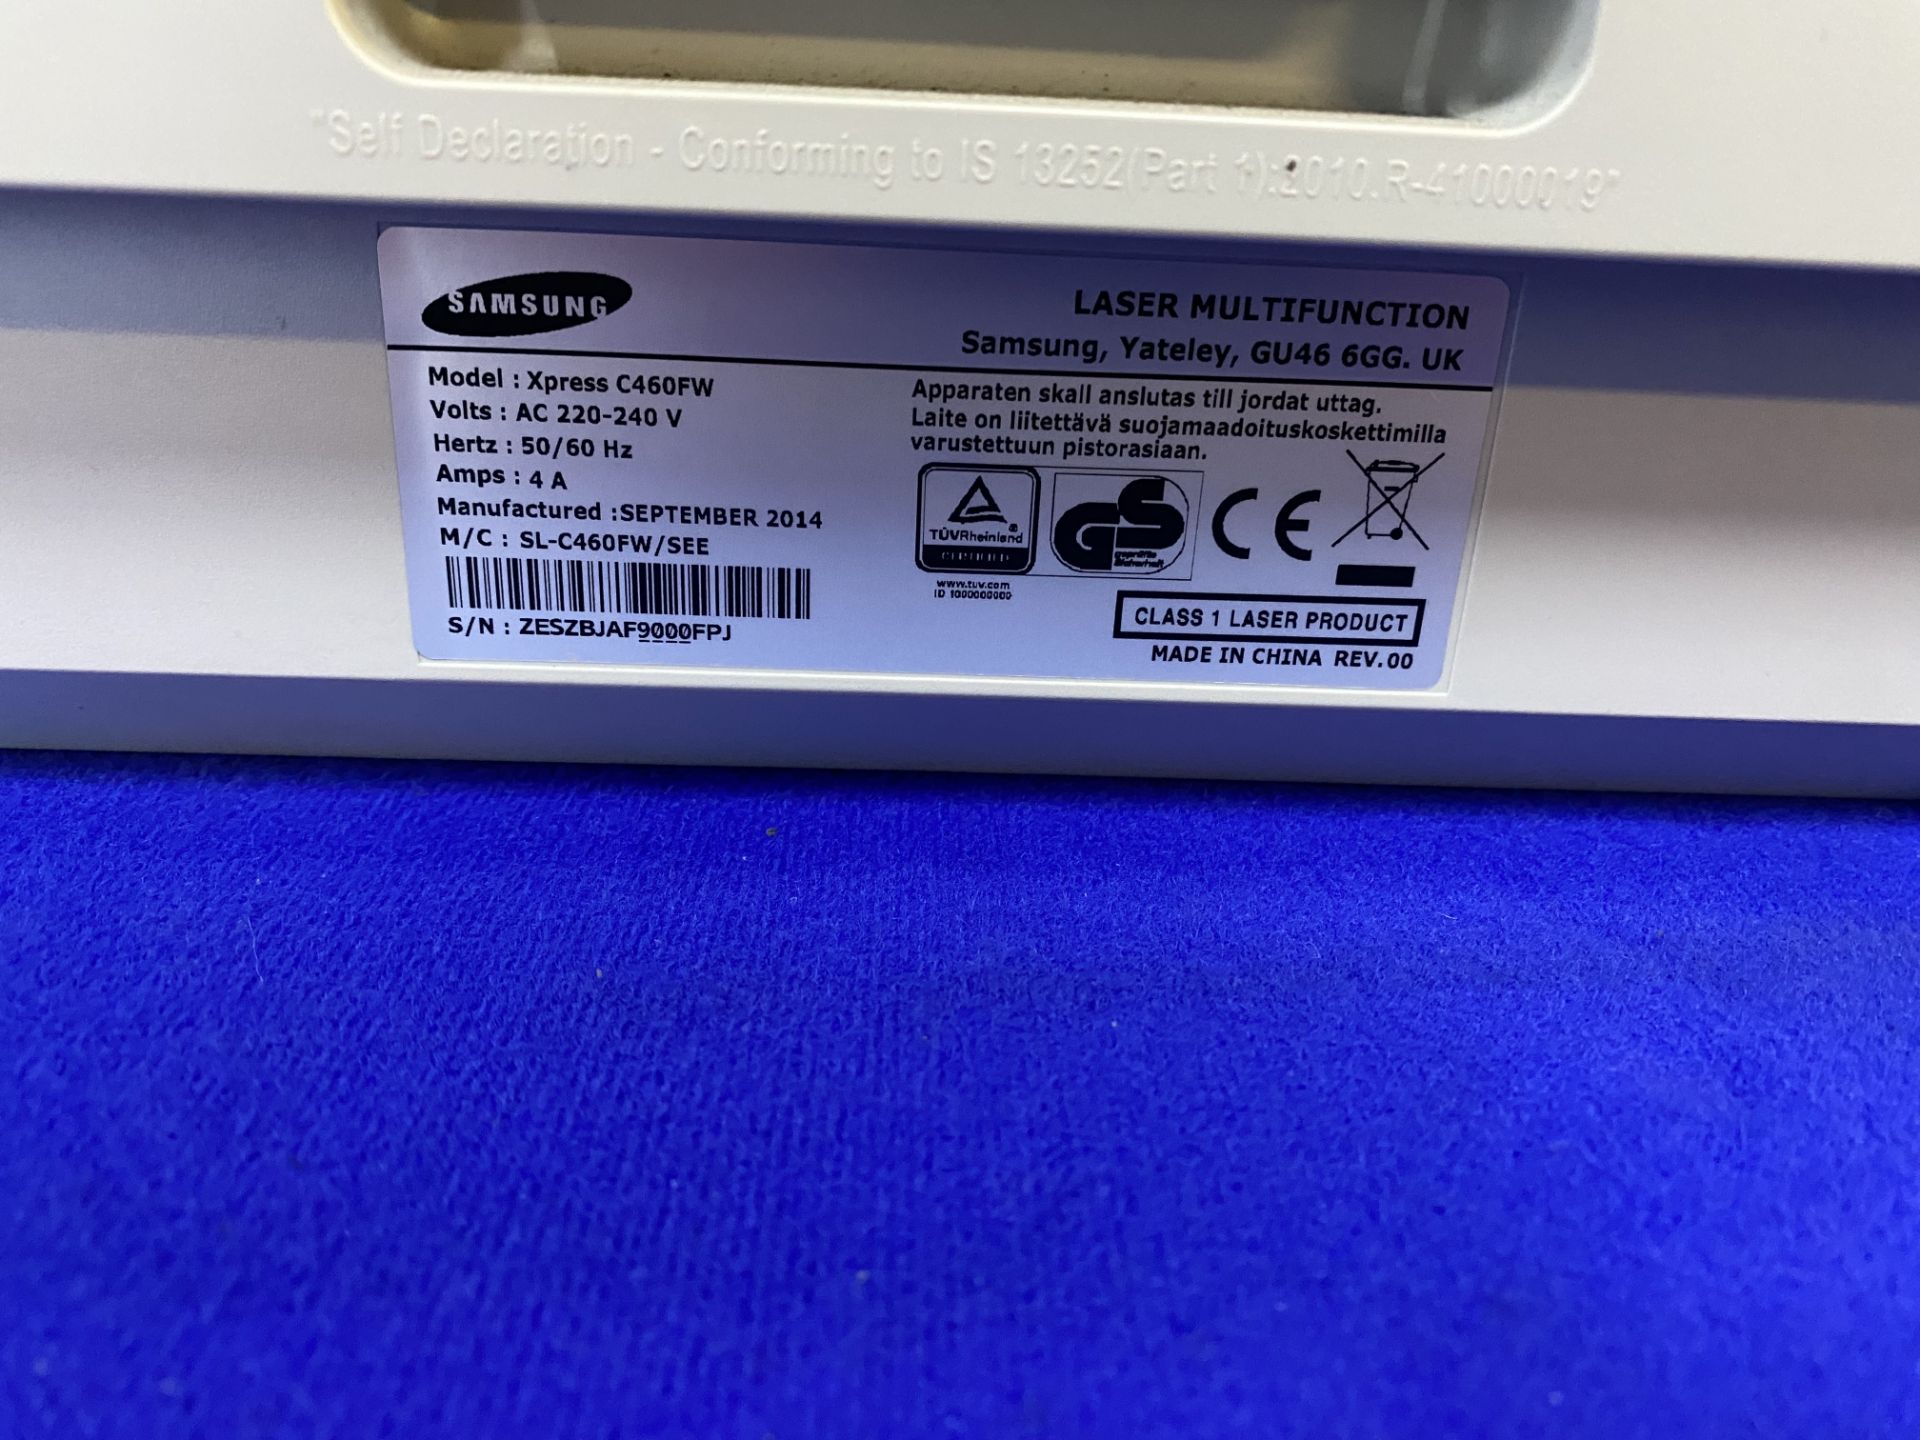 Samsung Xpress C460FW Colour All-In-One Laser Printer - Image 24 of 24